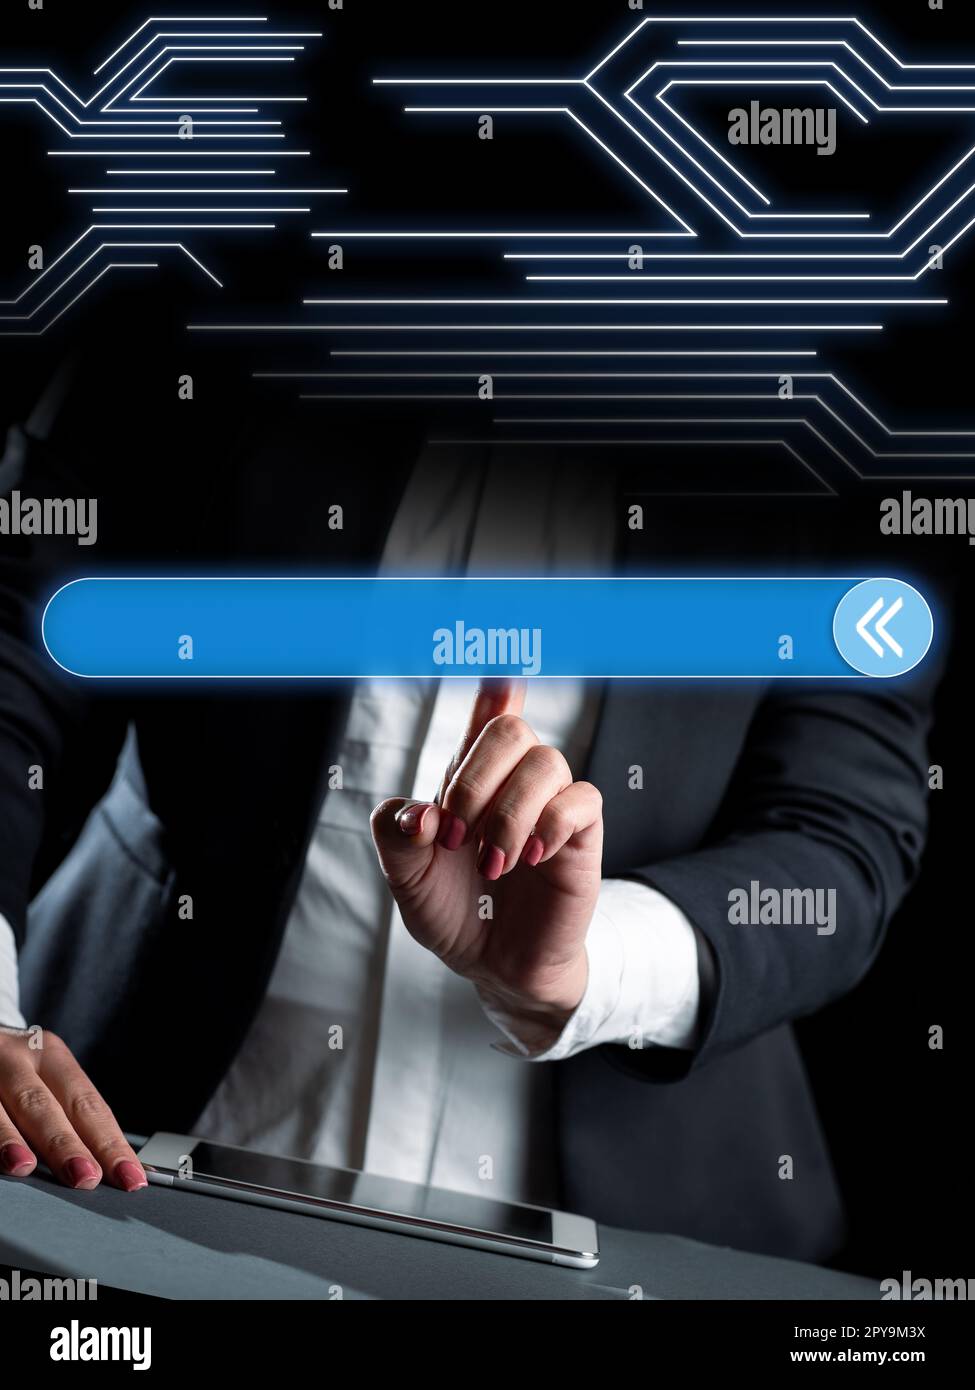 Lady sitting at the table and pressing virtual button with his finger. Mobile phone laying on desk and glowing. Important information inside frame in futuristic style. Stock Photo